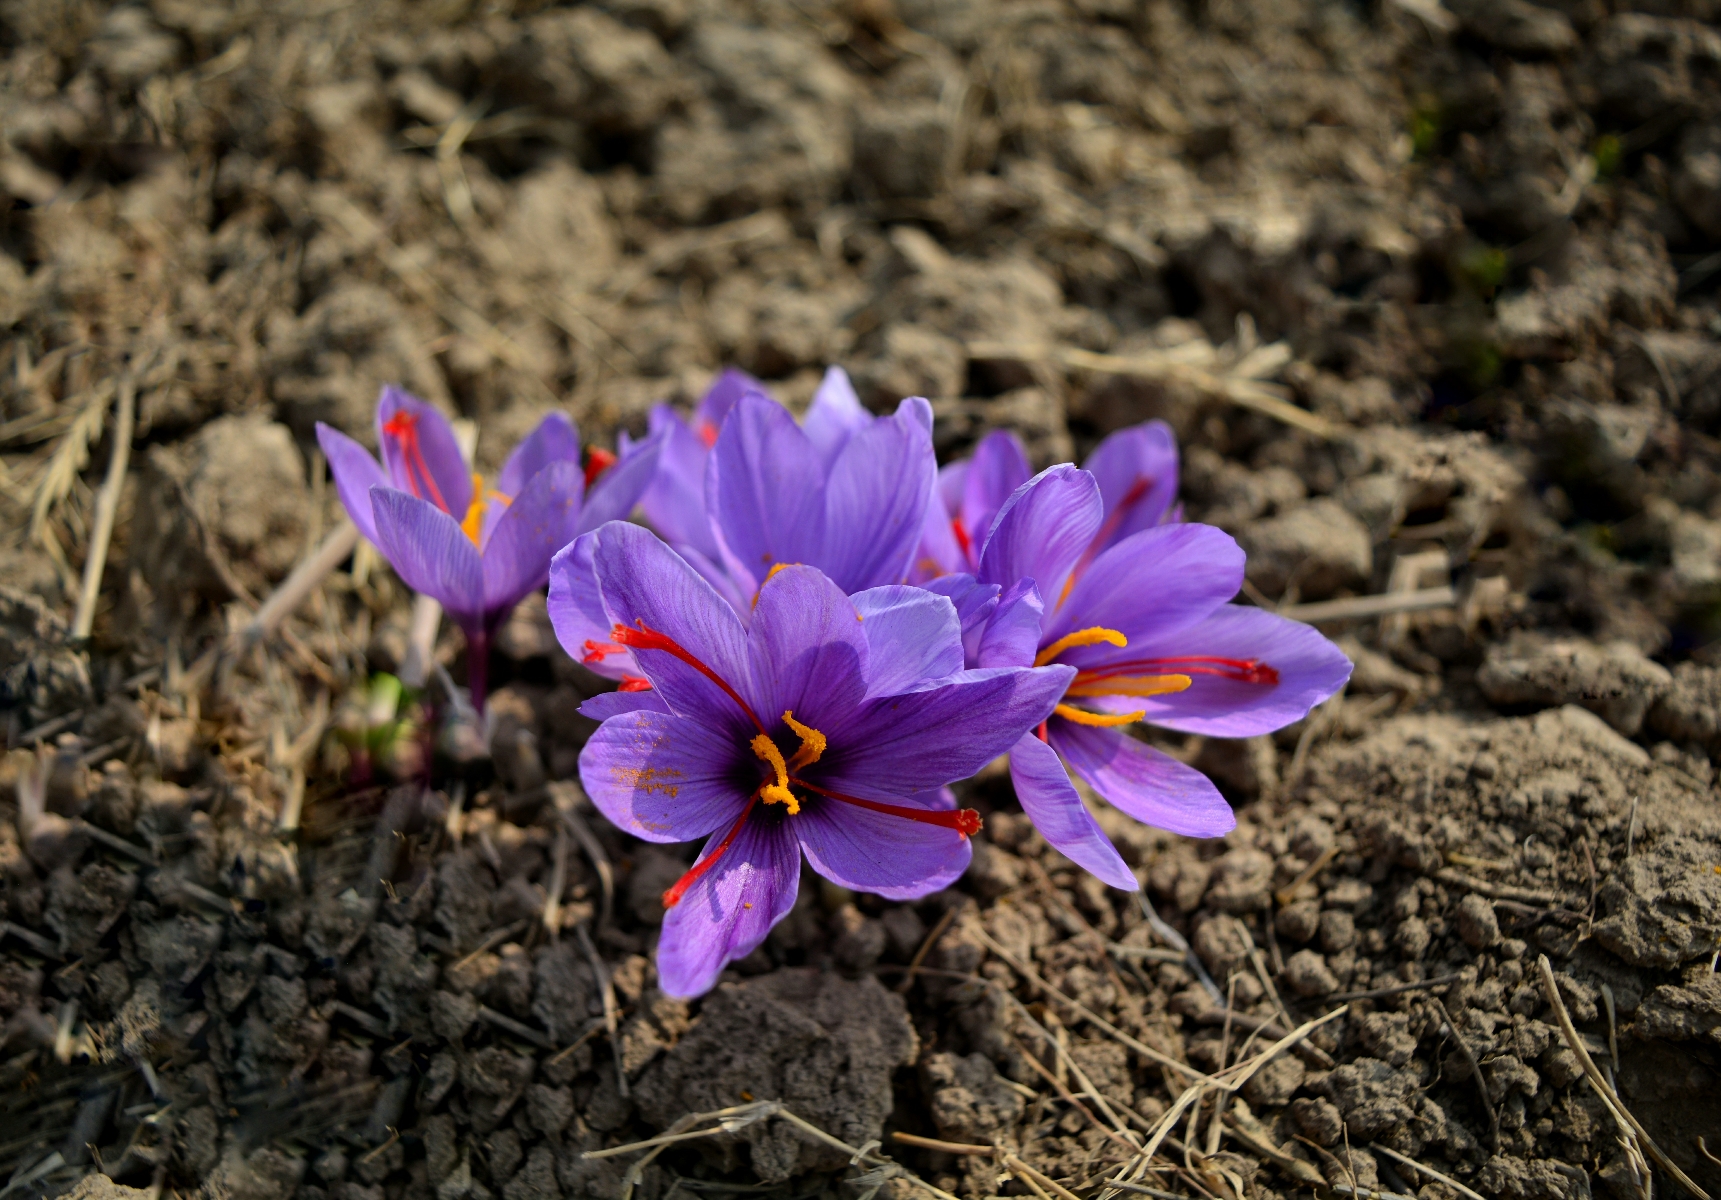 A blooming saffron flower. The three maroon colored stigmas is the spice.